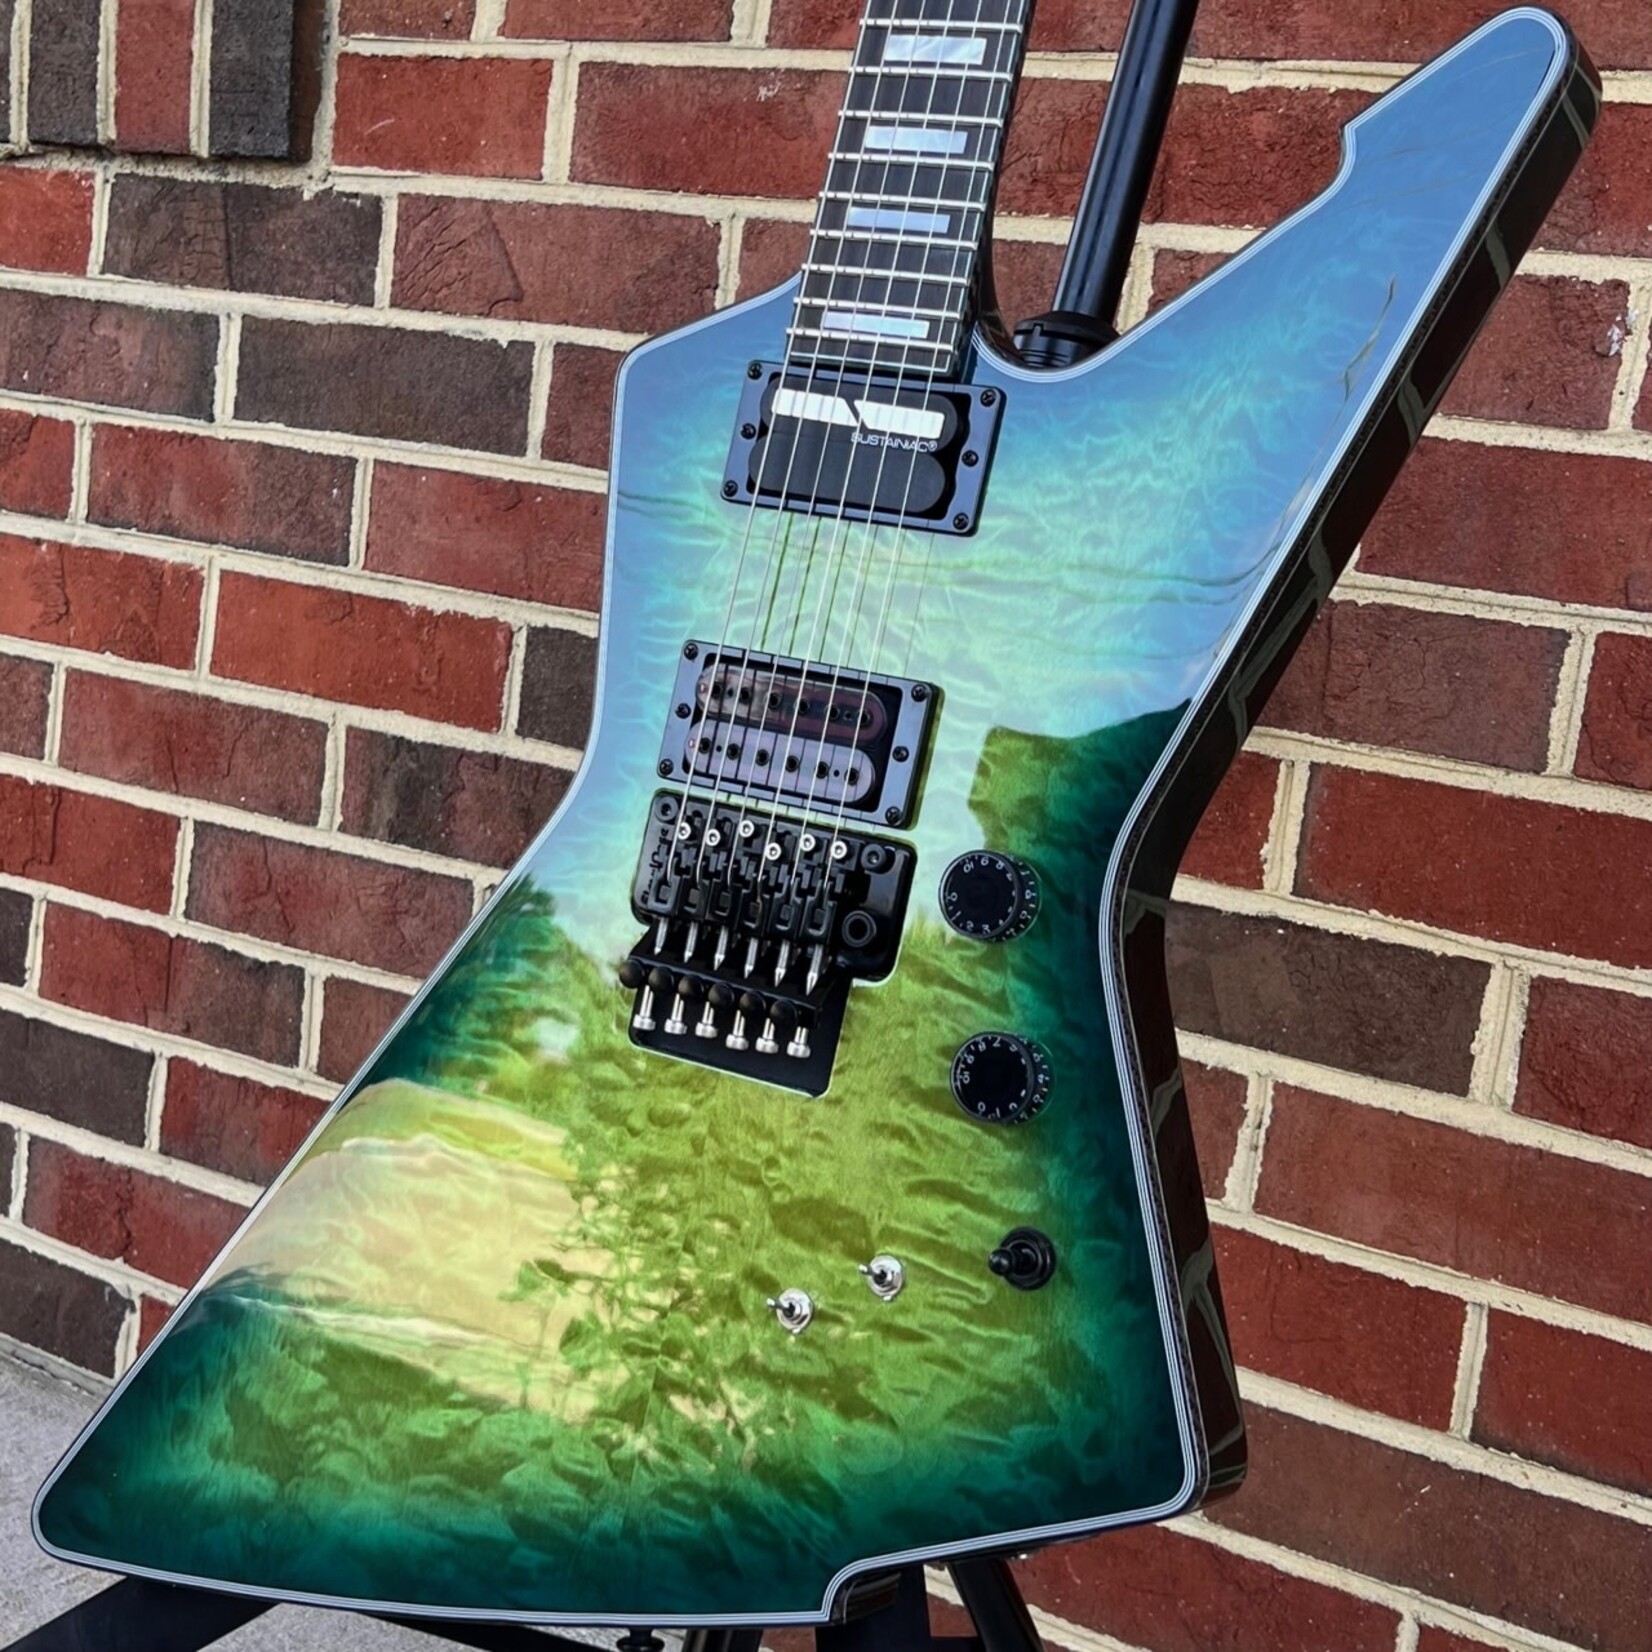 Schecter Guitar Research Schecter E-1 FR S Special Edition, Green Burst, Quilted Maple Top, Sustainiac Pickup, SN# W23050933